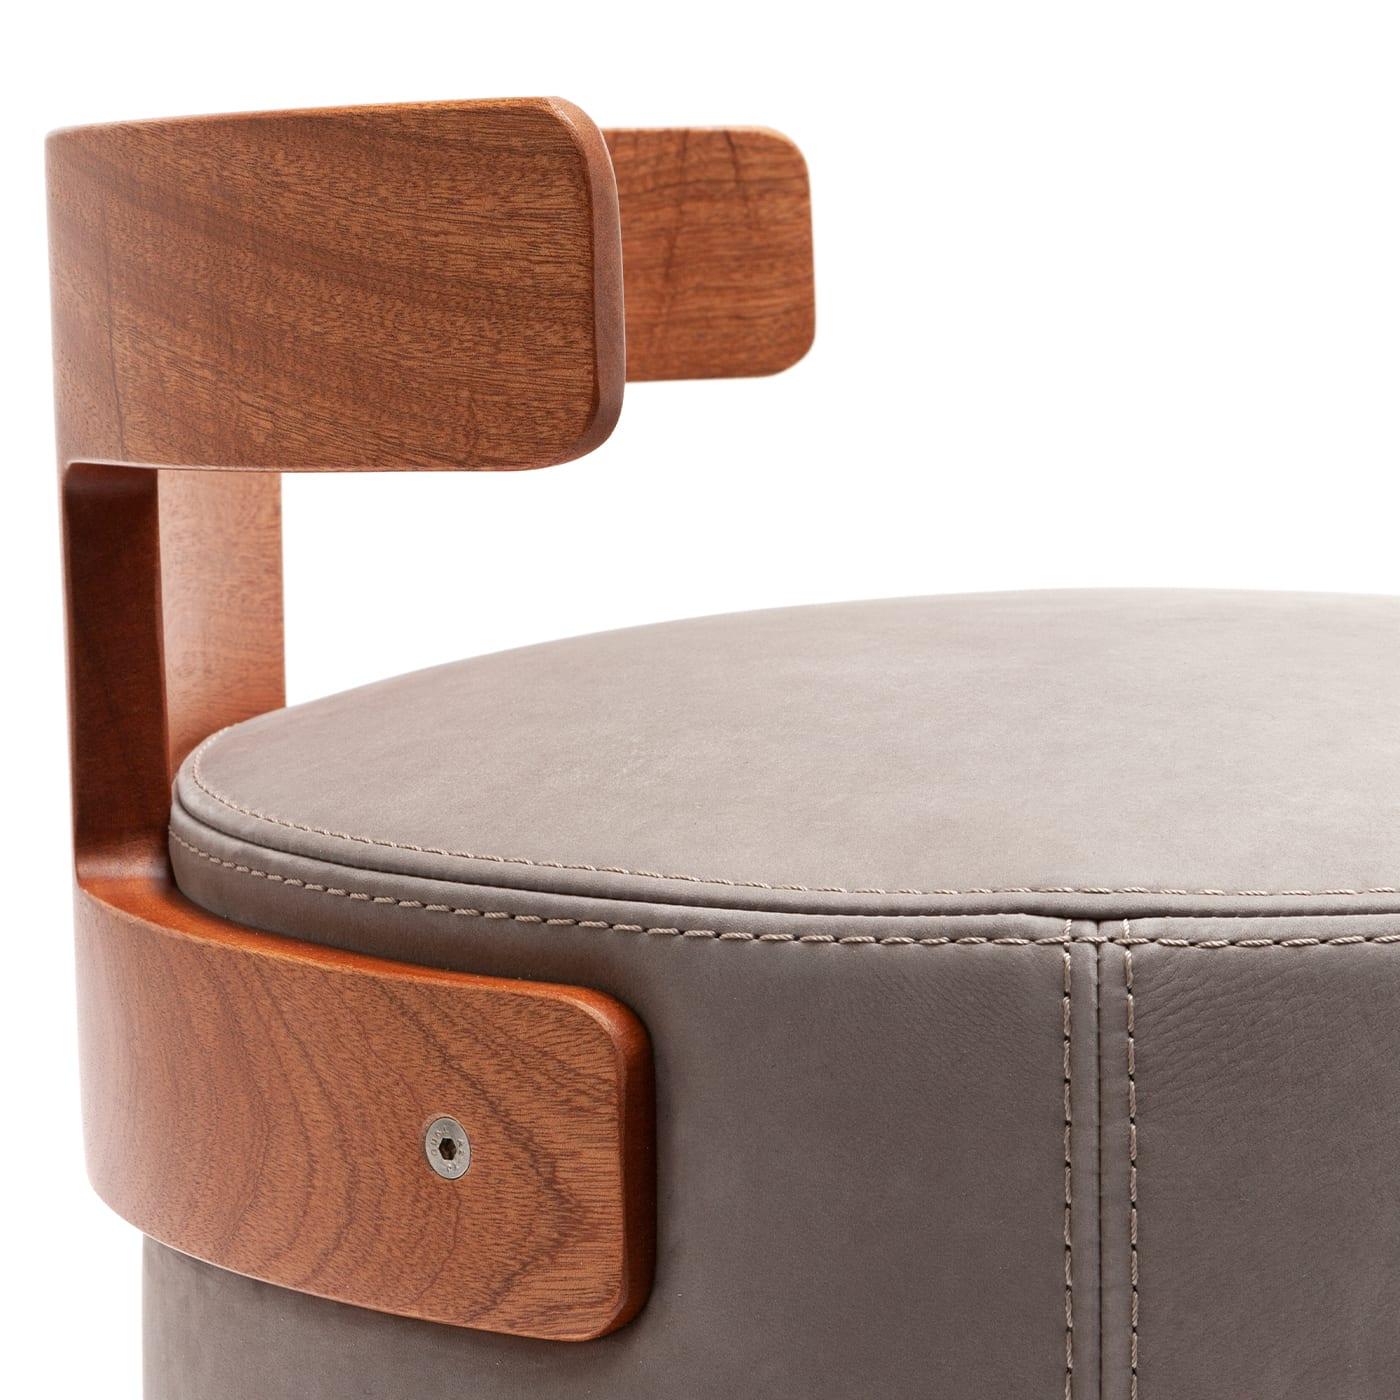 A customizable design of singular character, this pouf is a refined and ergonomic design by Massimo Castagna. Softly padded, the cylindrical seat is upholstered with beige Nabuk leather and is supported with a T-shaped backrest in mahogany.